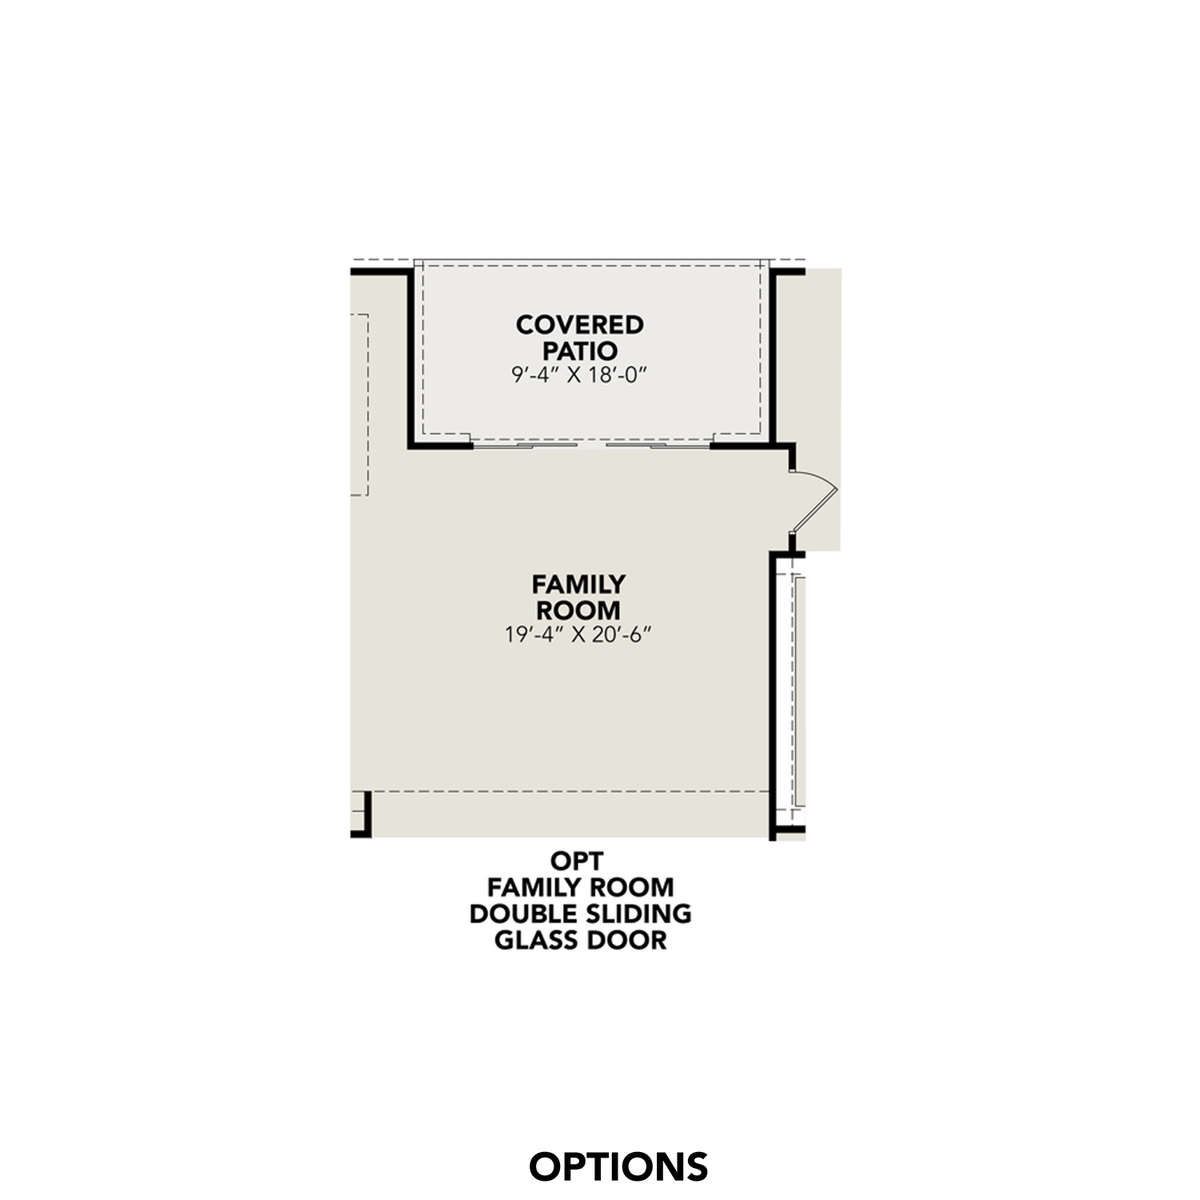 5 - The Jennings F floor plan layout for 2906 Tortuga in Davidson Homes' Ladera community.